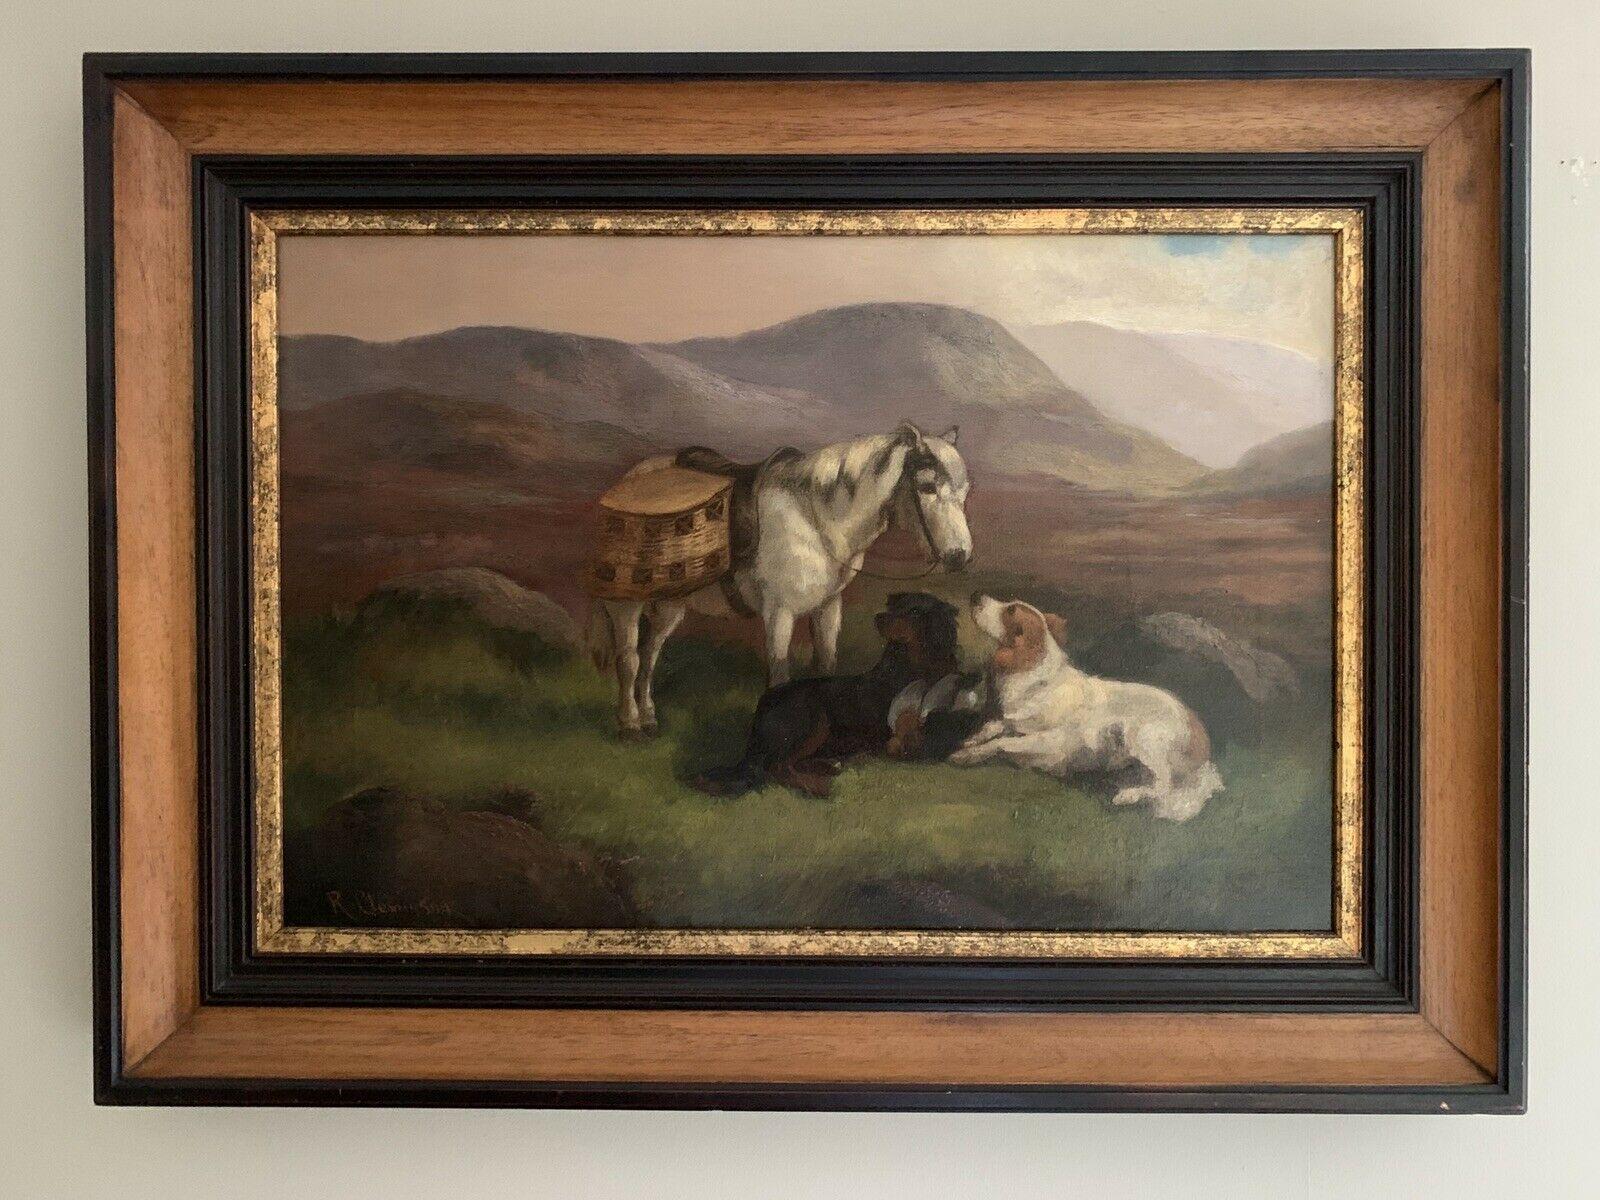 ROBERT CLEMINSON (1864-1903) LARGE SIGNED OIL - HIGHLAND PONY & DOGS LANDSCAPE - Painting by Robert Cleminson